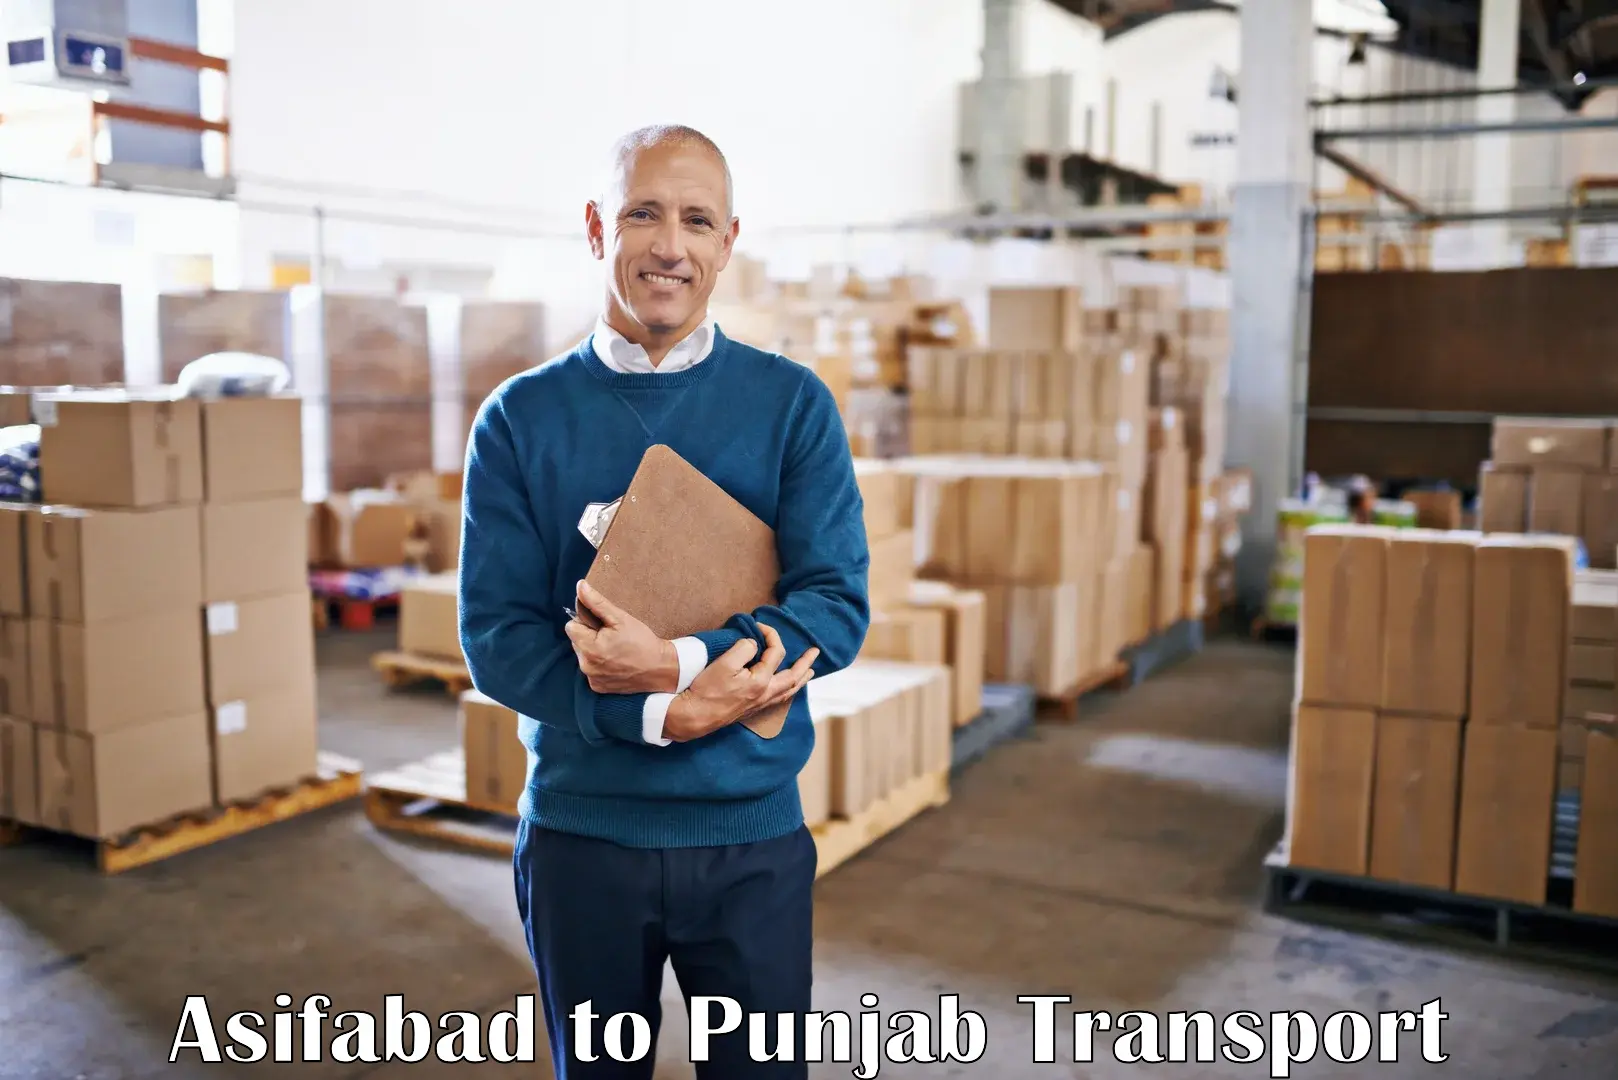 Express transport services Asifabad to Ludhiana